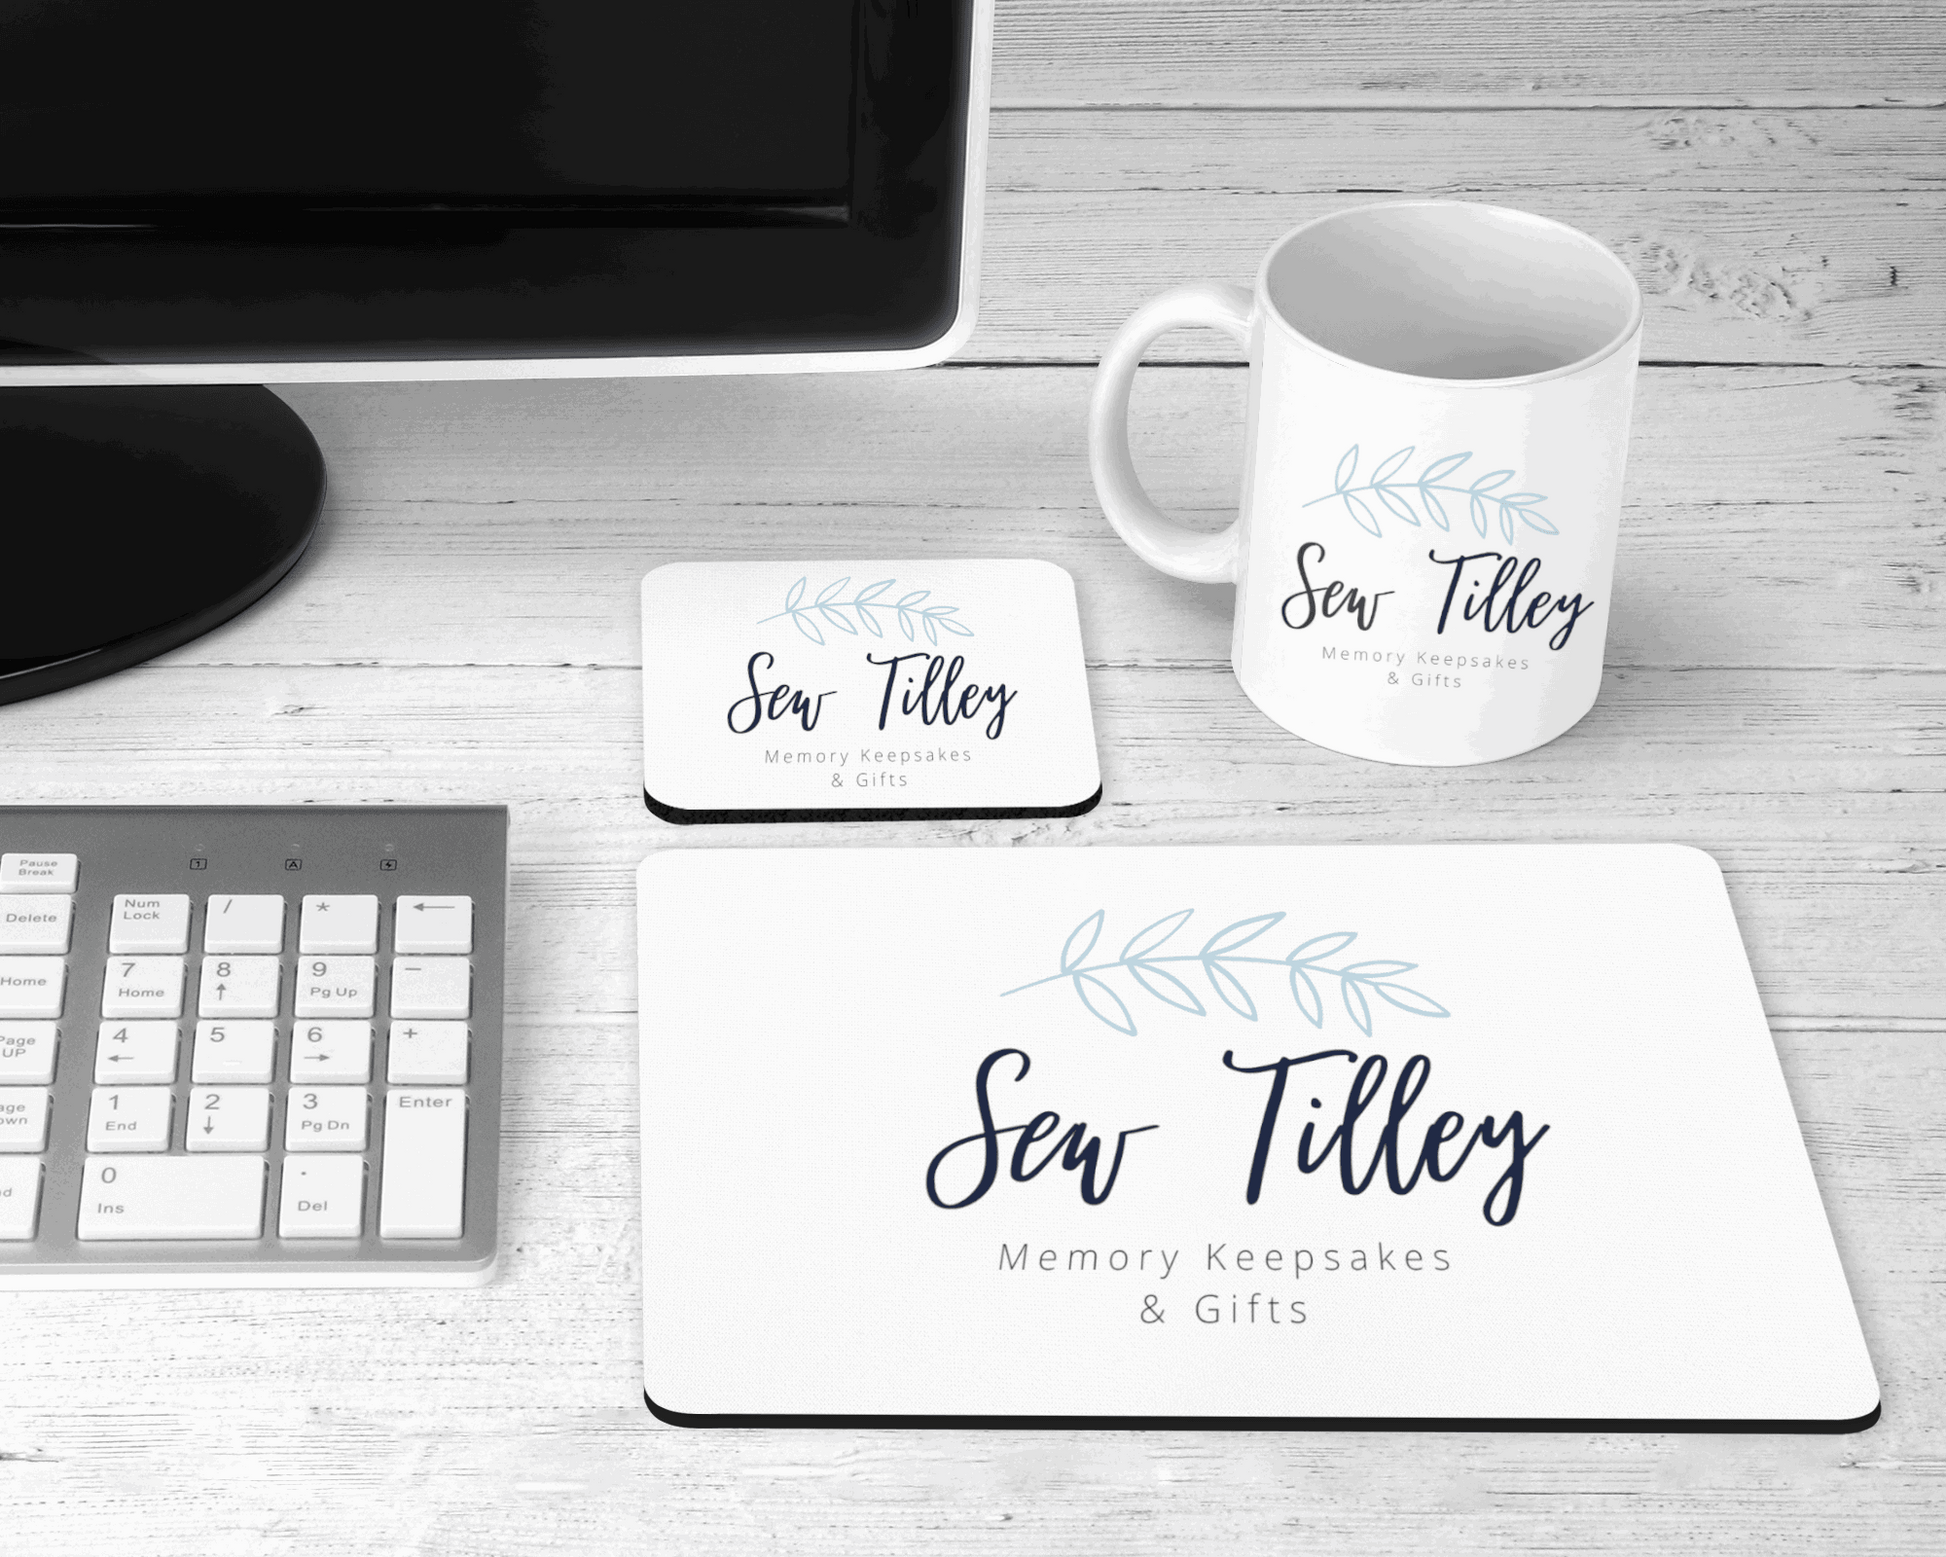 Personalised mouse mat - Sew Tilley